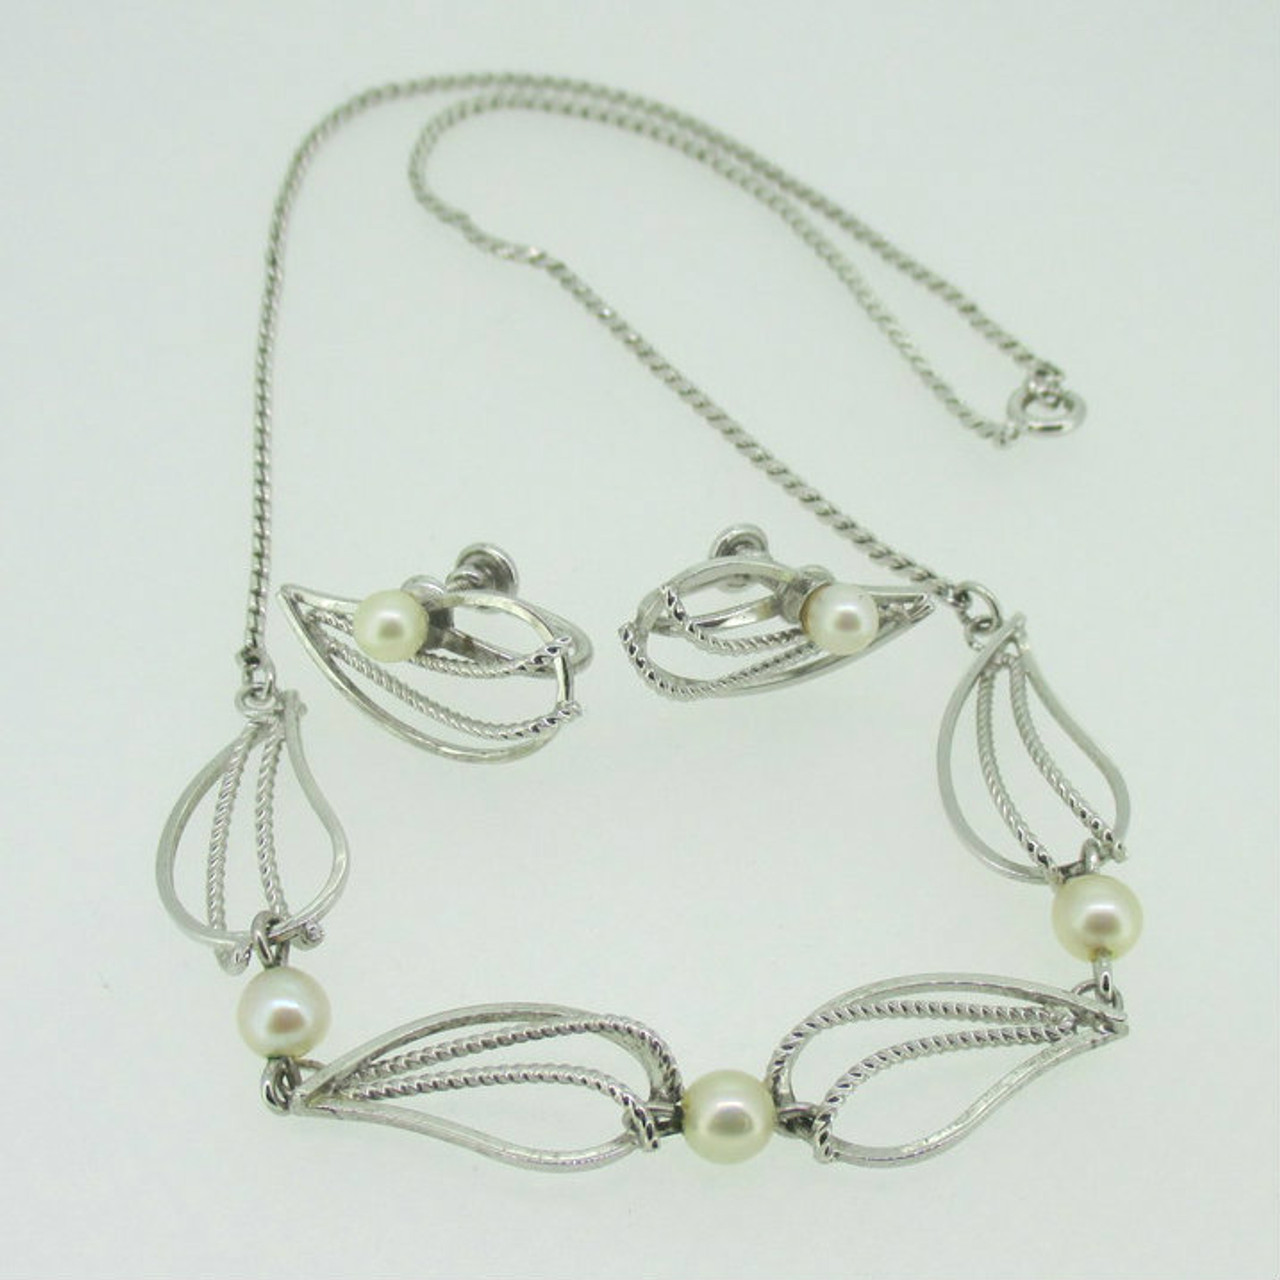 van dell sterling silver necklace